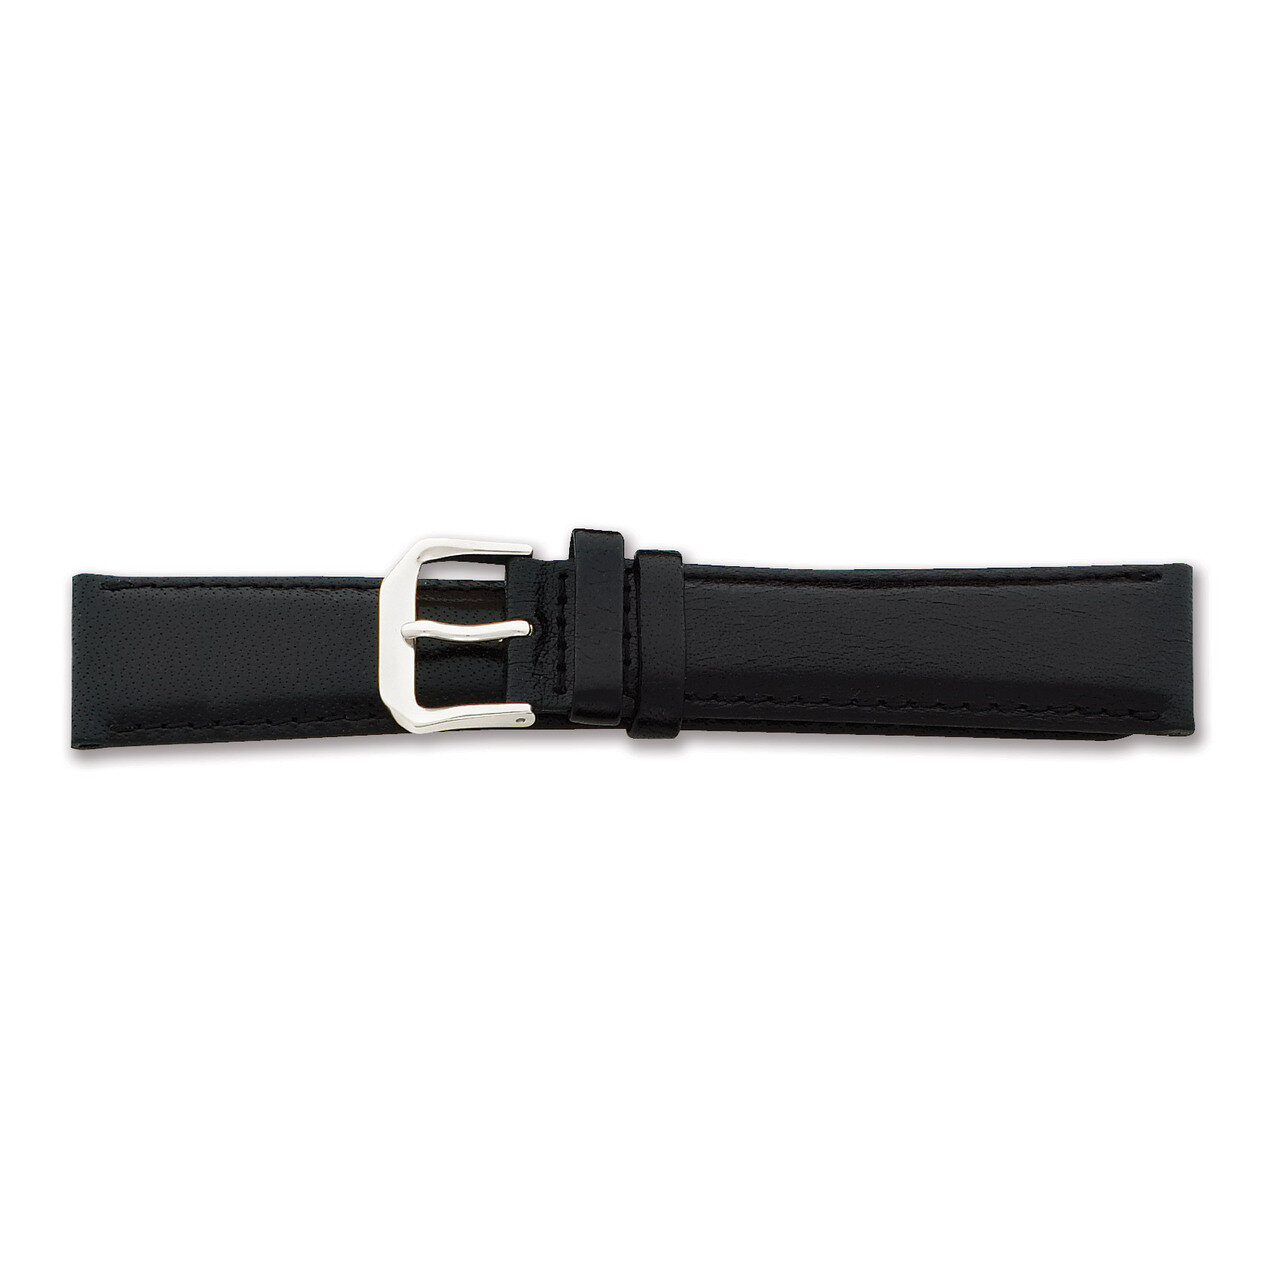 17mm Black Smooth Leather Watch Band 7.5 Inch Silver-tone Buckle BAW8-17